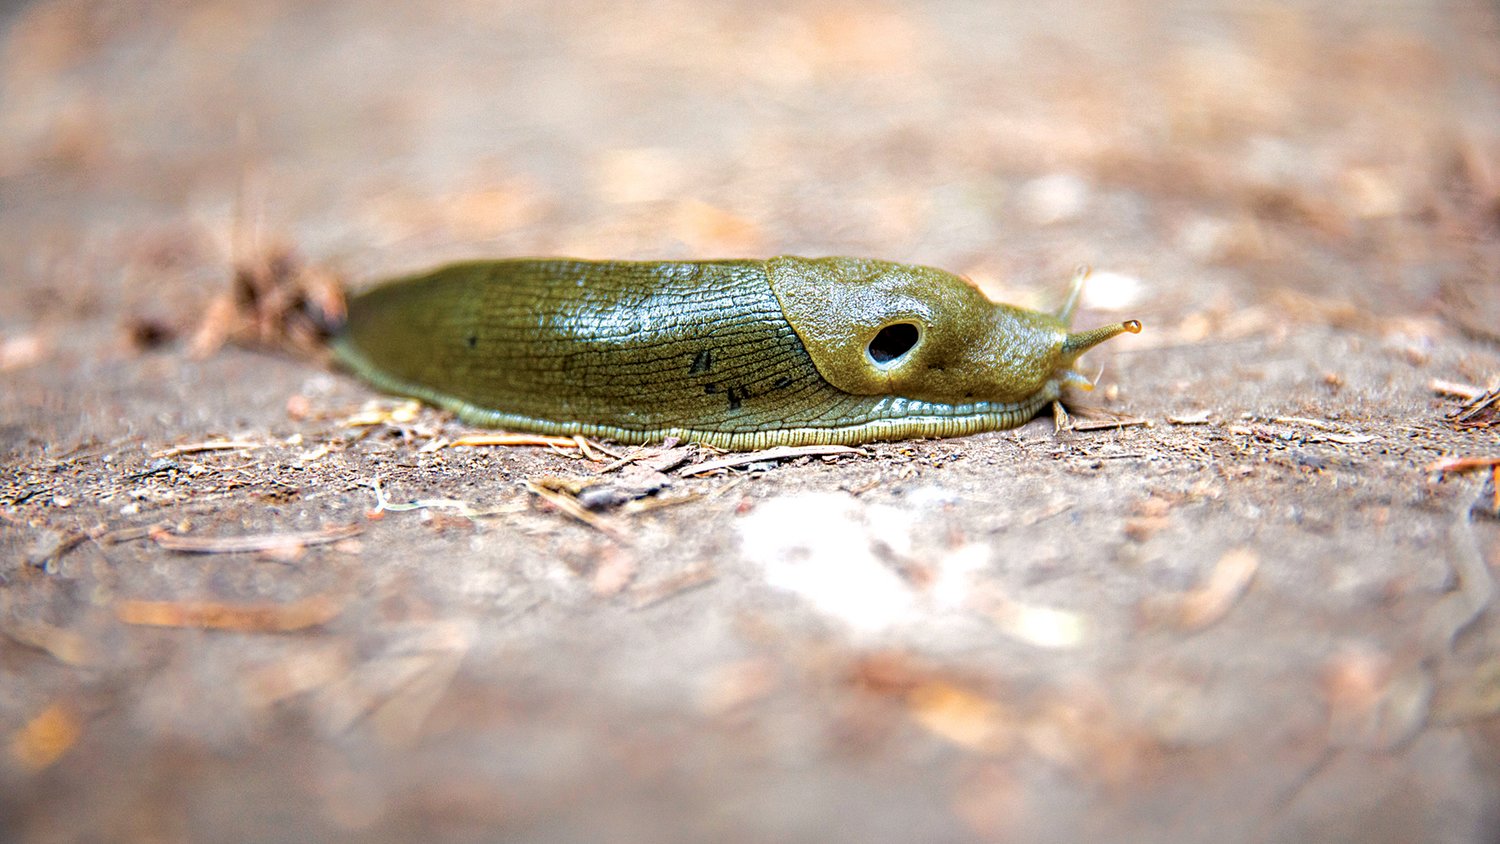 A slug crosses a trail in the Gifford Pinchot National Forest Wednesday evening.